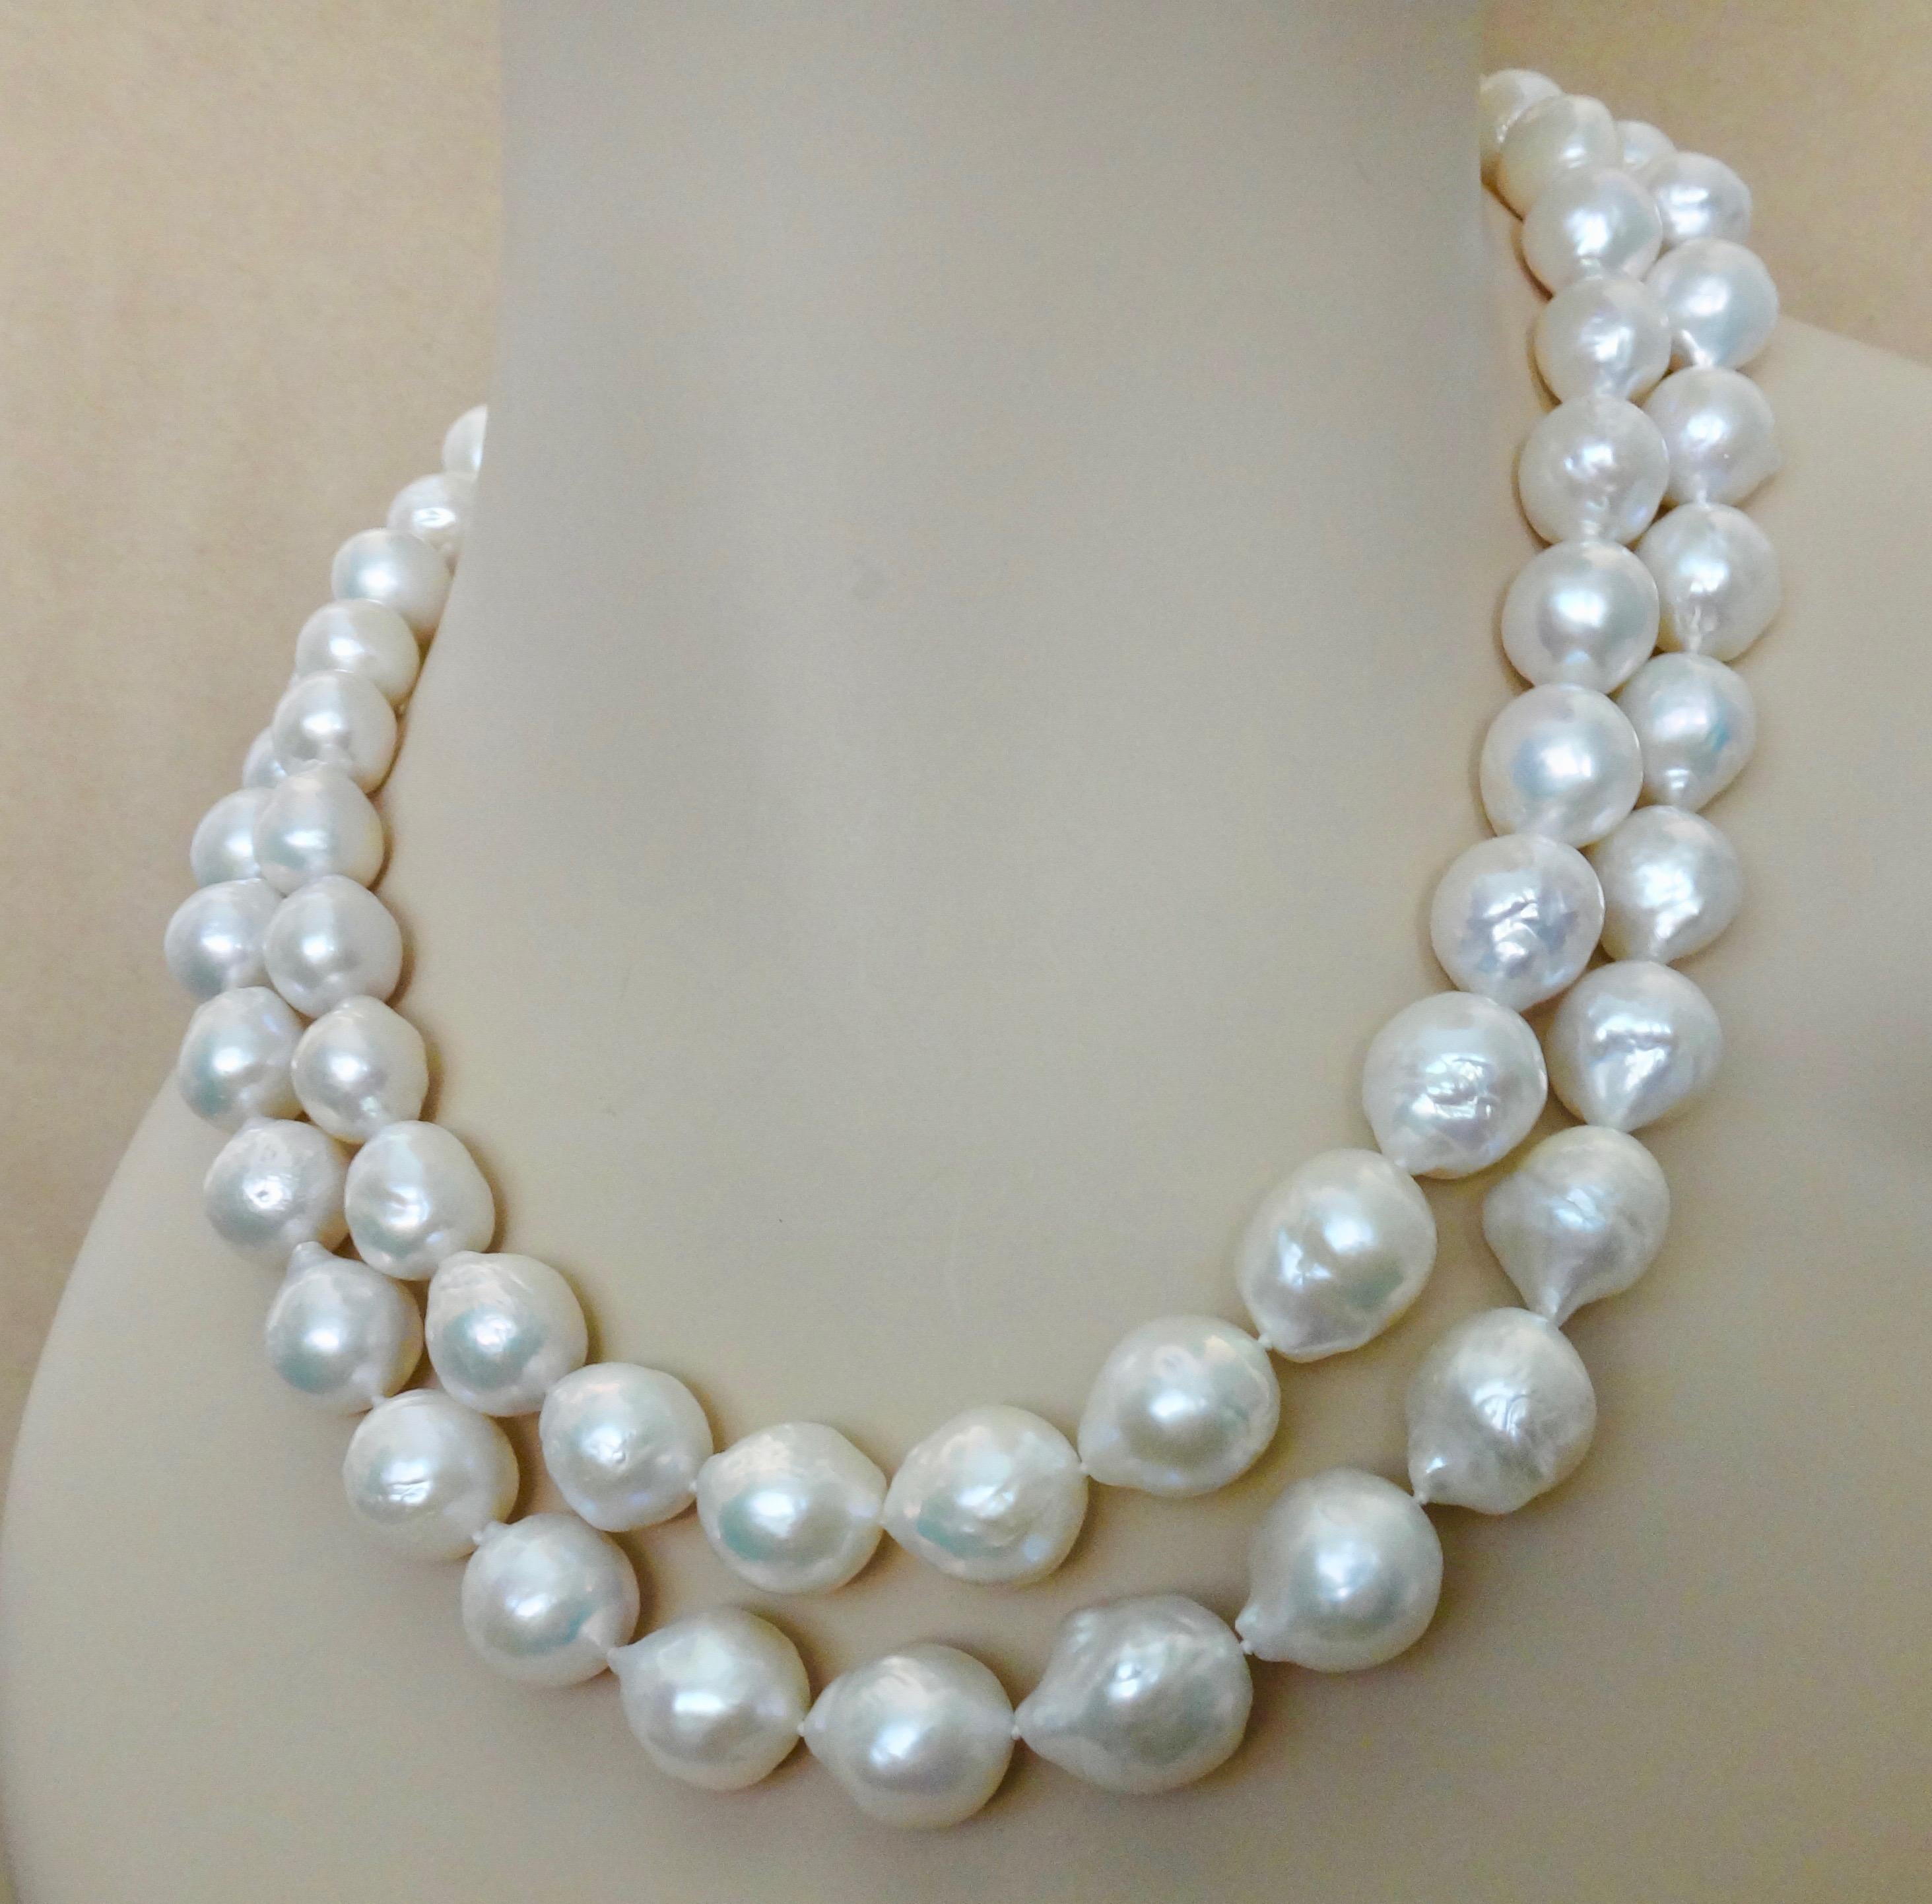 Two strands of luminous white Kasumi pearls (origin: Indonesia) form this dramatic necklace.  The wrinkly surface is typical of this type of baroque pearl.  They are graduated in size from the smallest at 11mm x 13mm to the largest at 13mm x 17mm. 